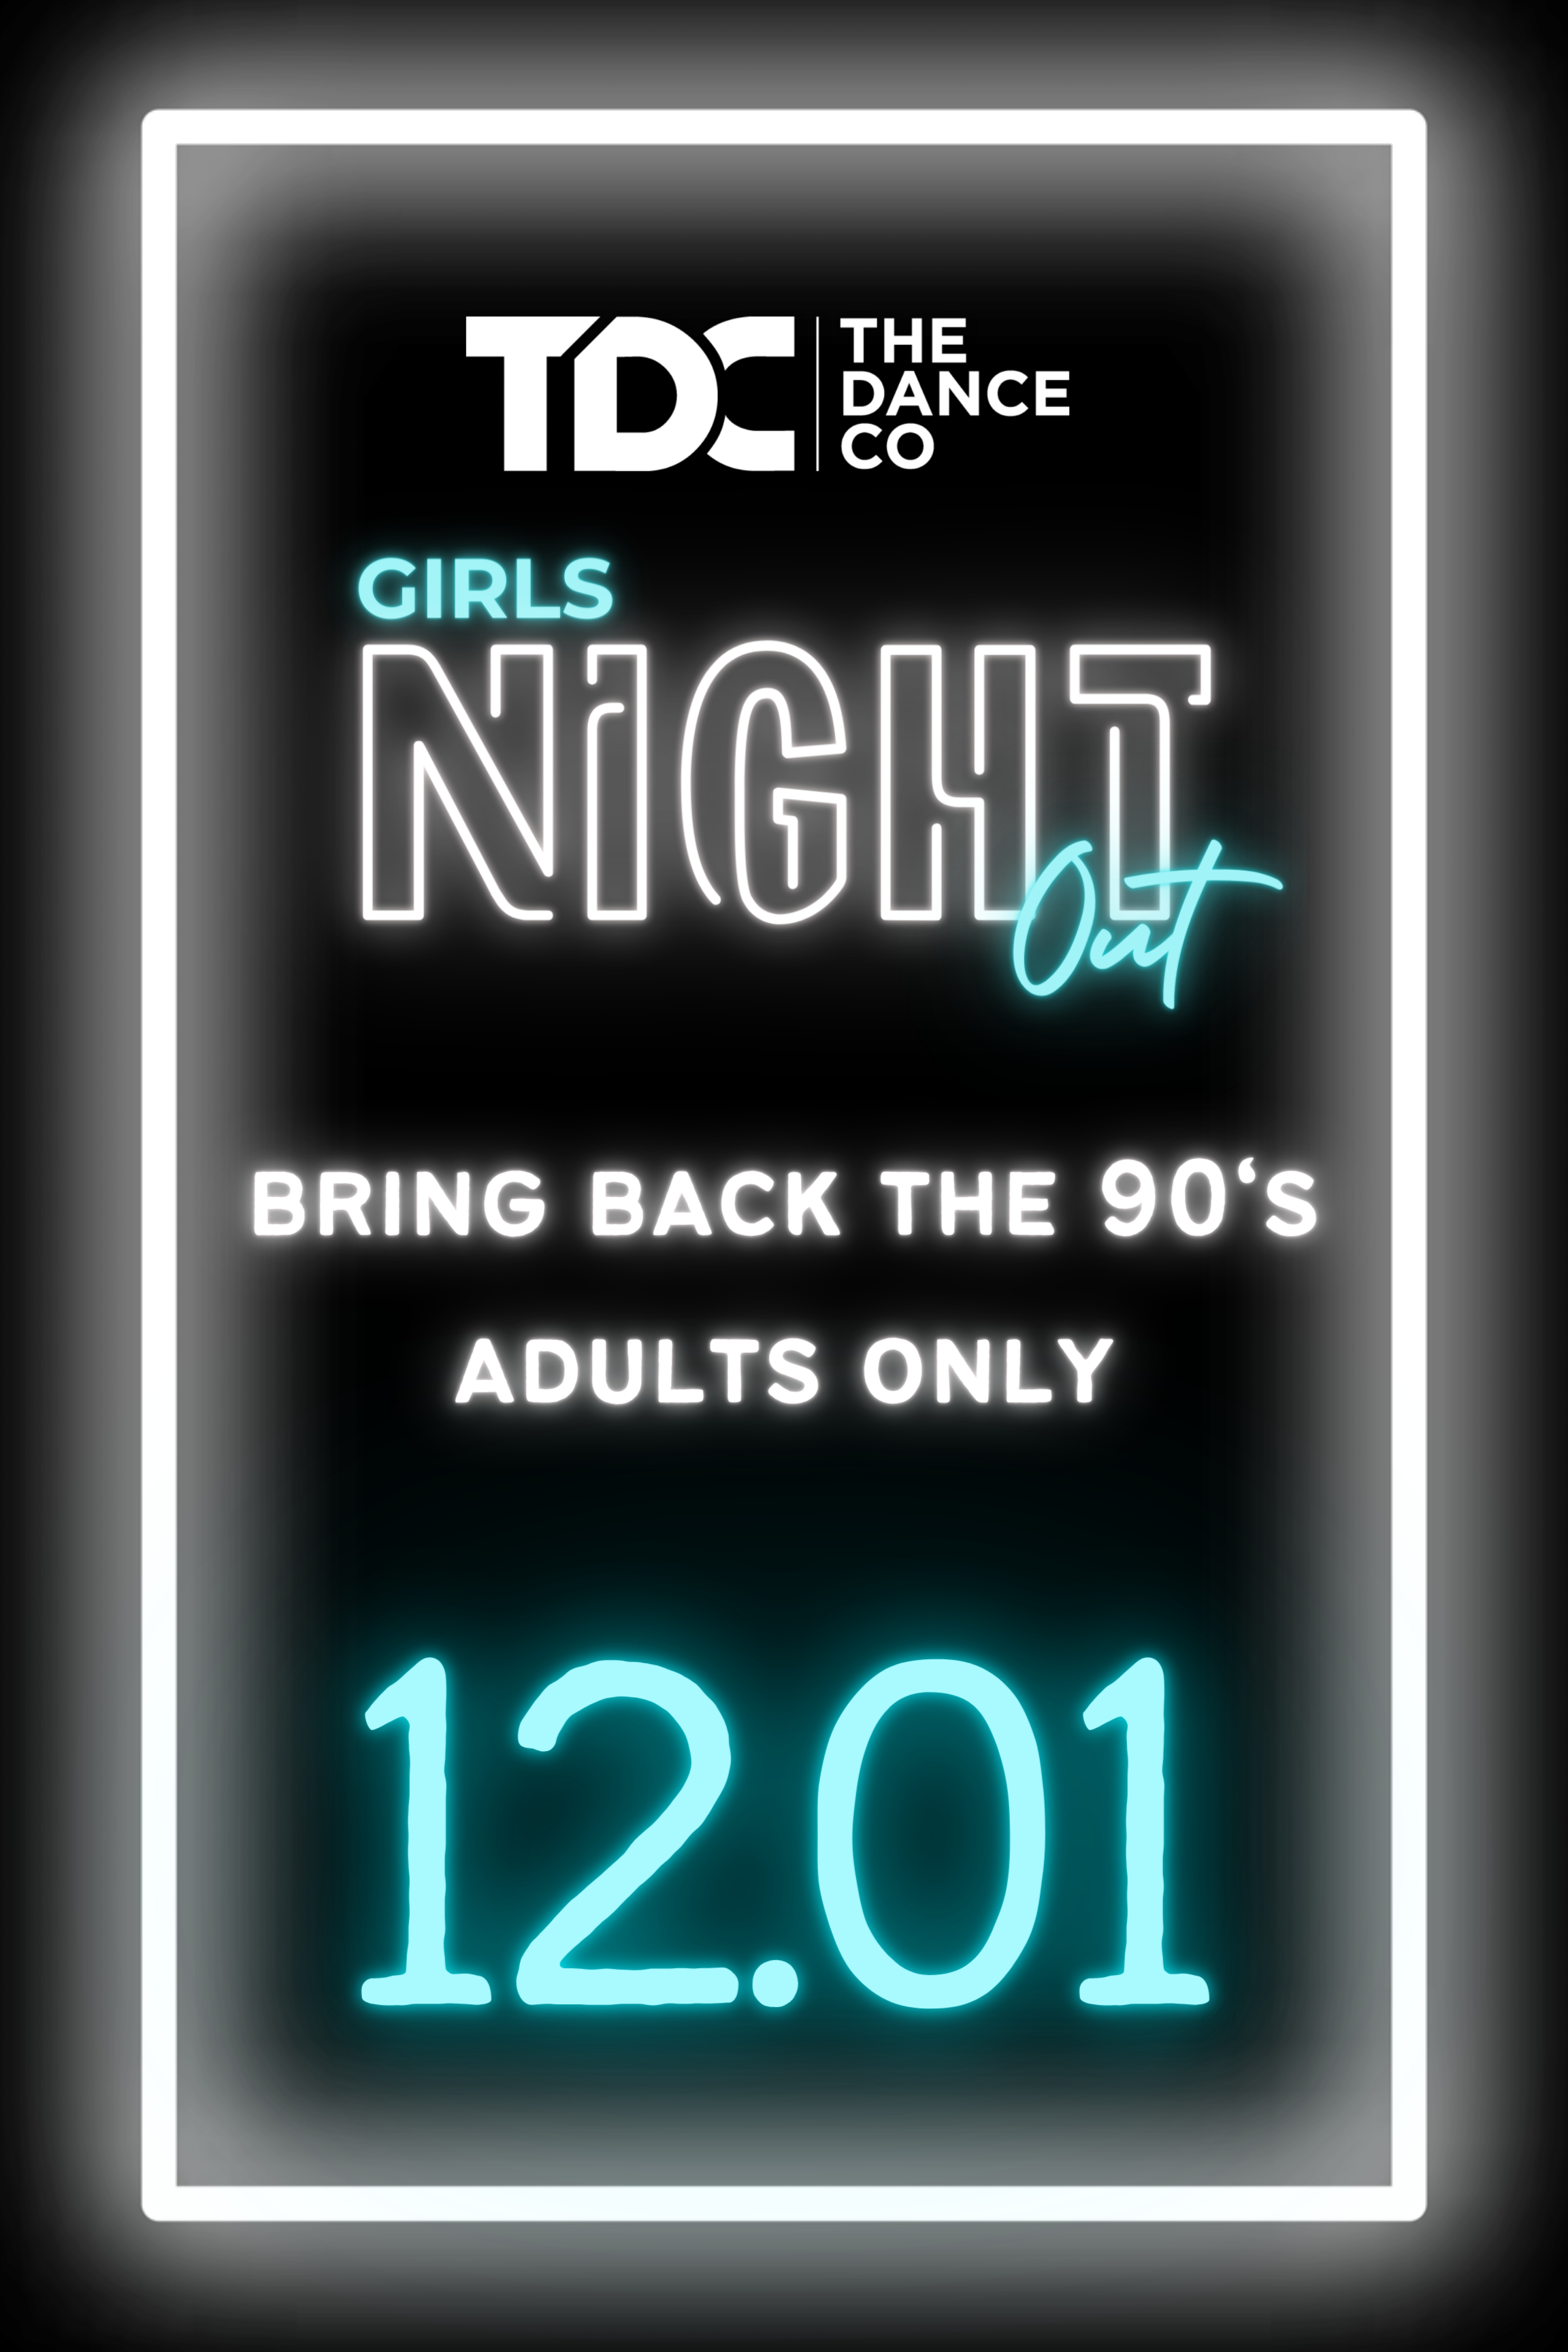 Girls Night Out – Bring Back The 90’s!